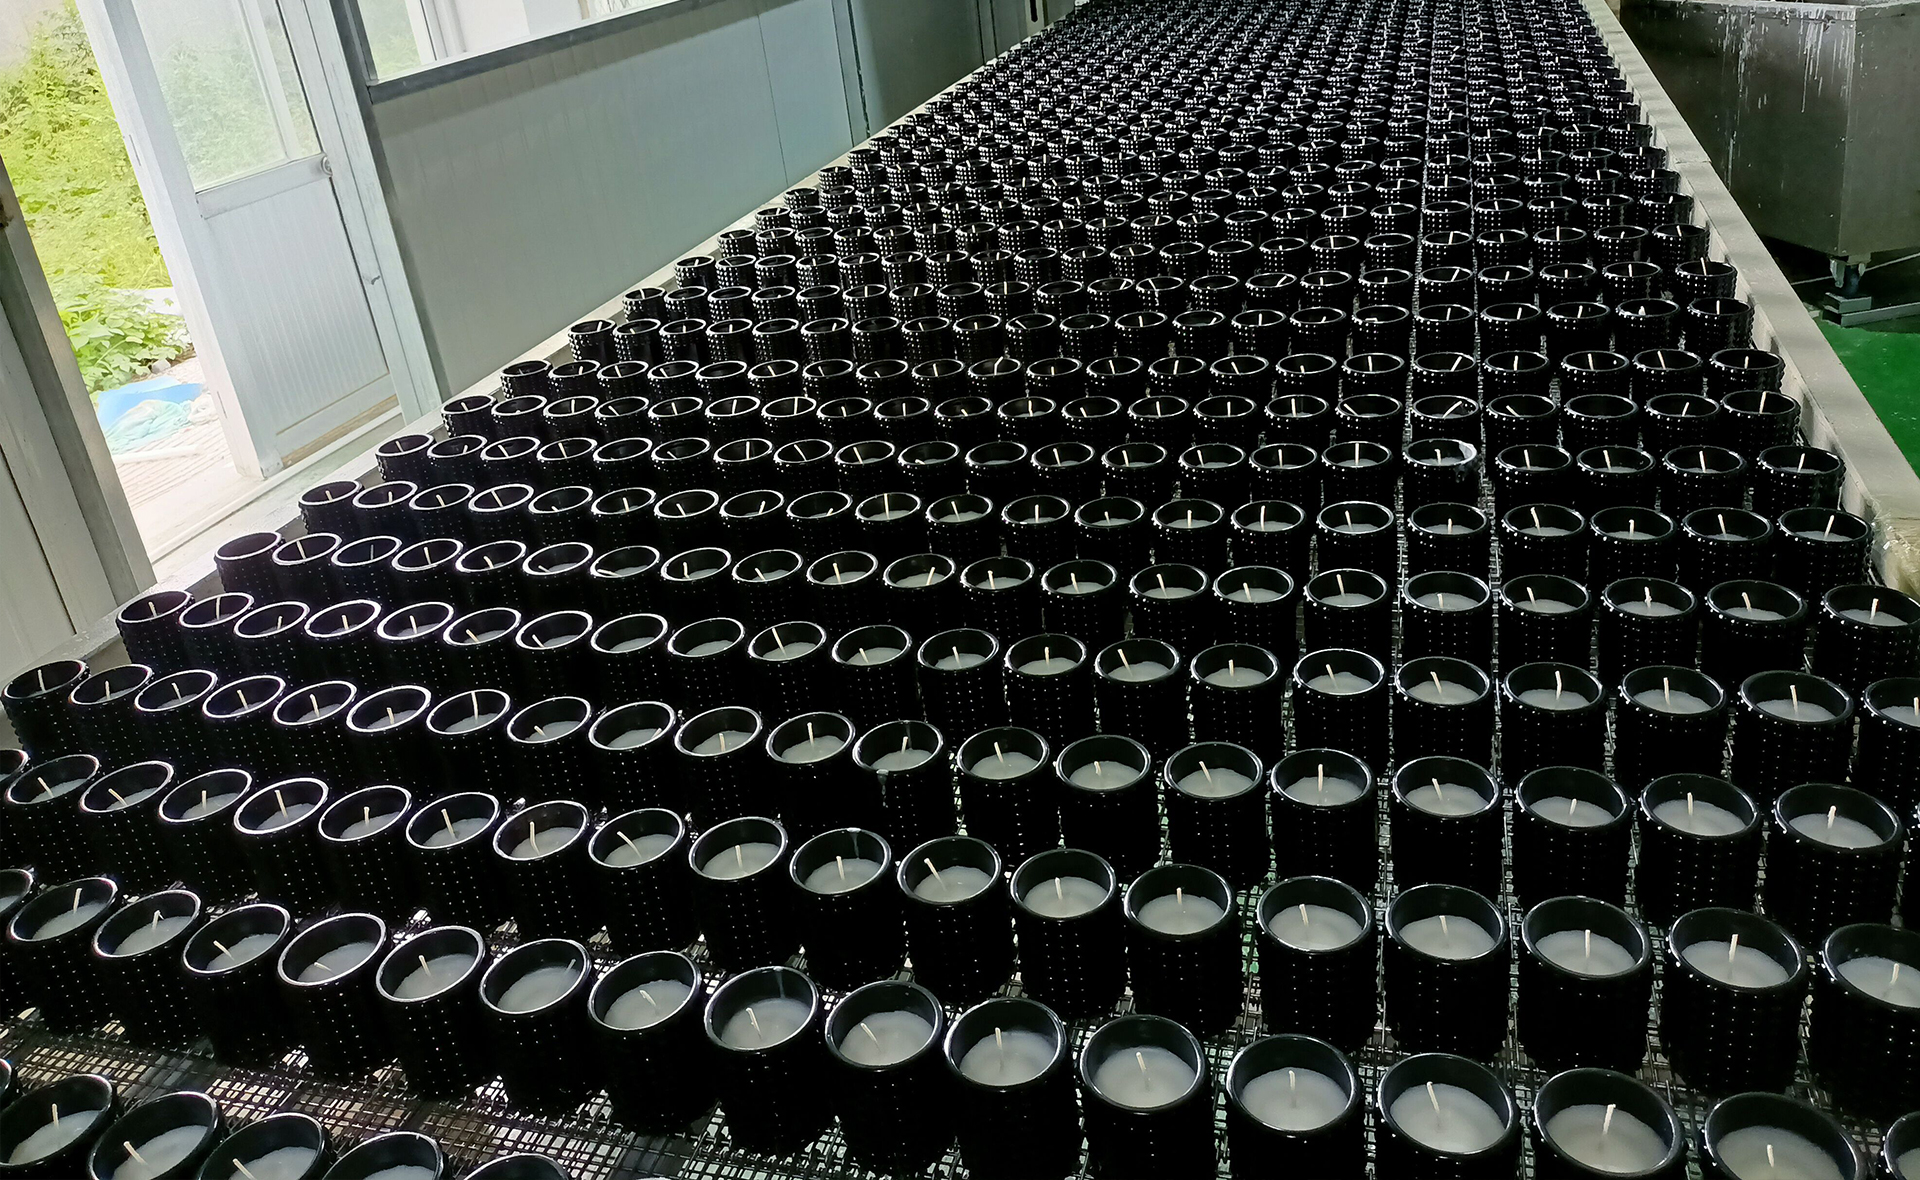 10000㎡ workshop with the capacity 30000 pcs glass candles per day,State of art of the production line